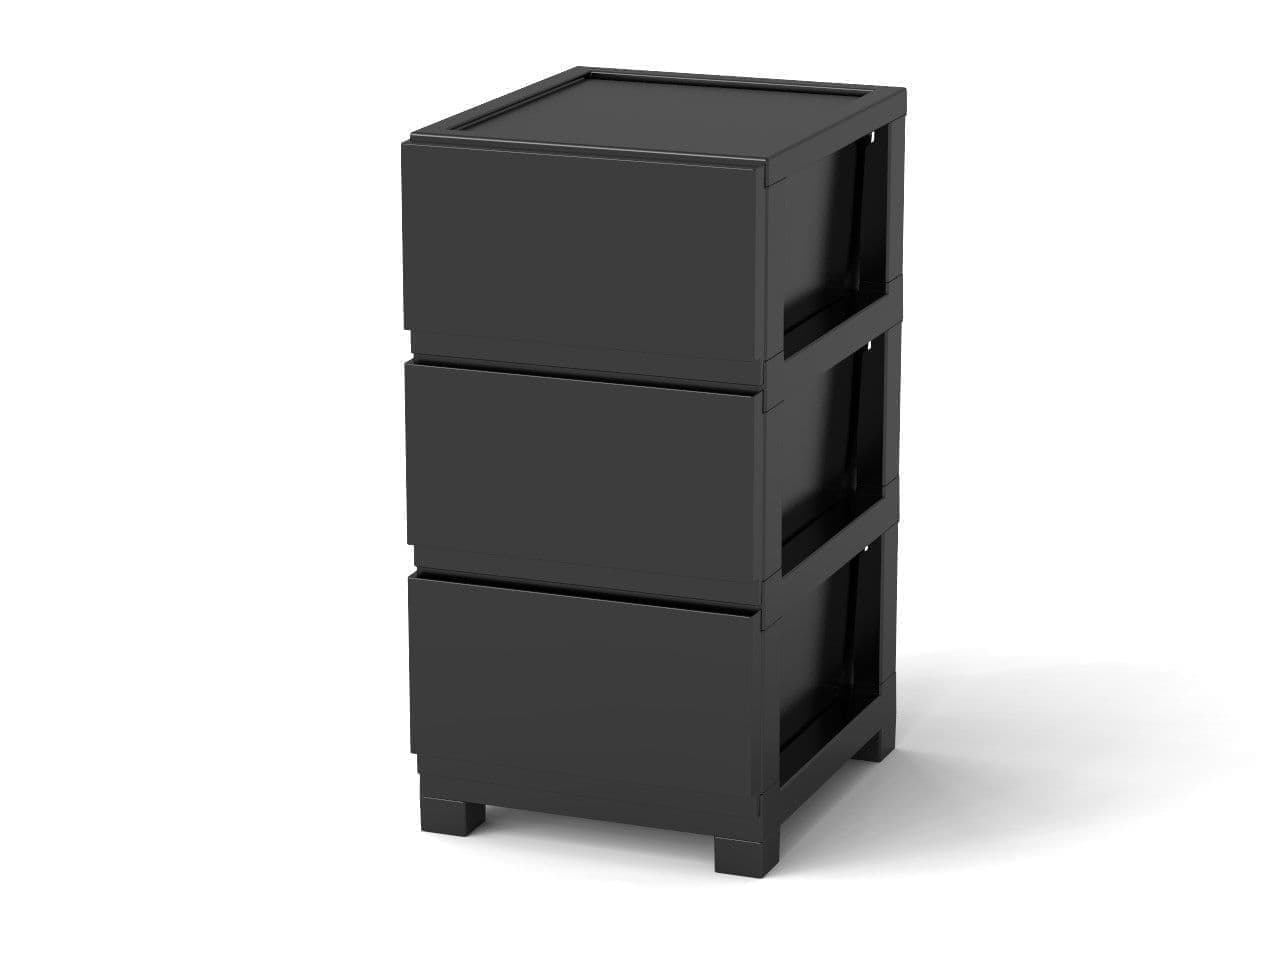 Nitori "Decony Chest of drawers, 3-drawer" black color